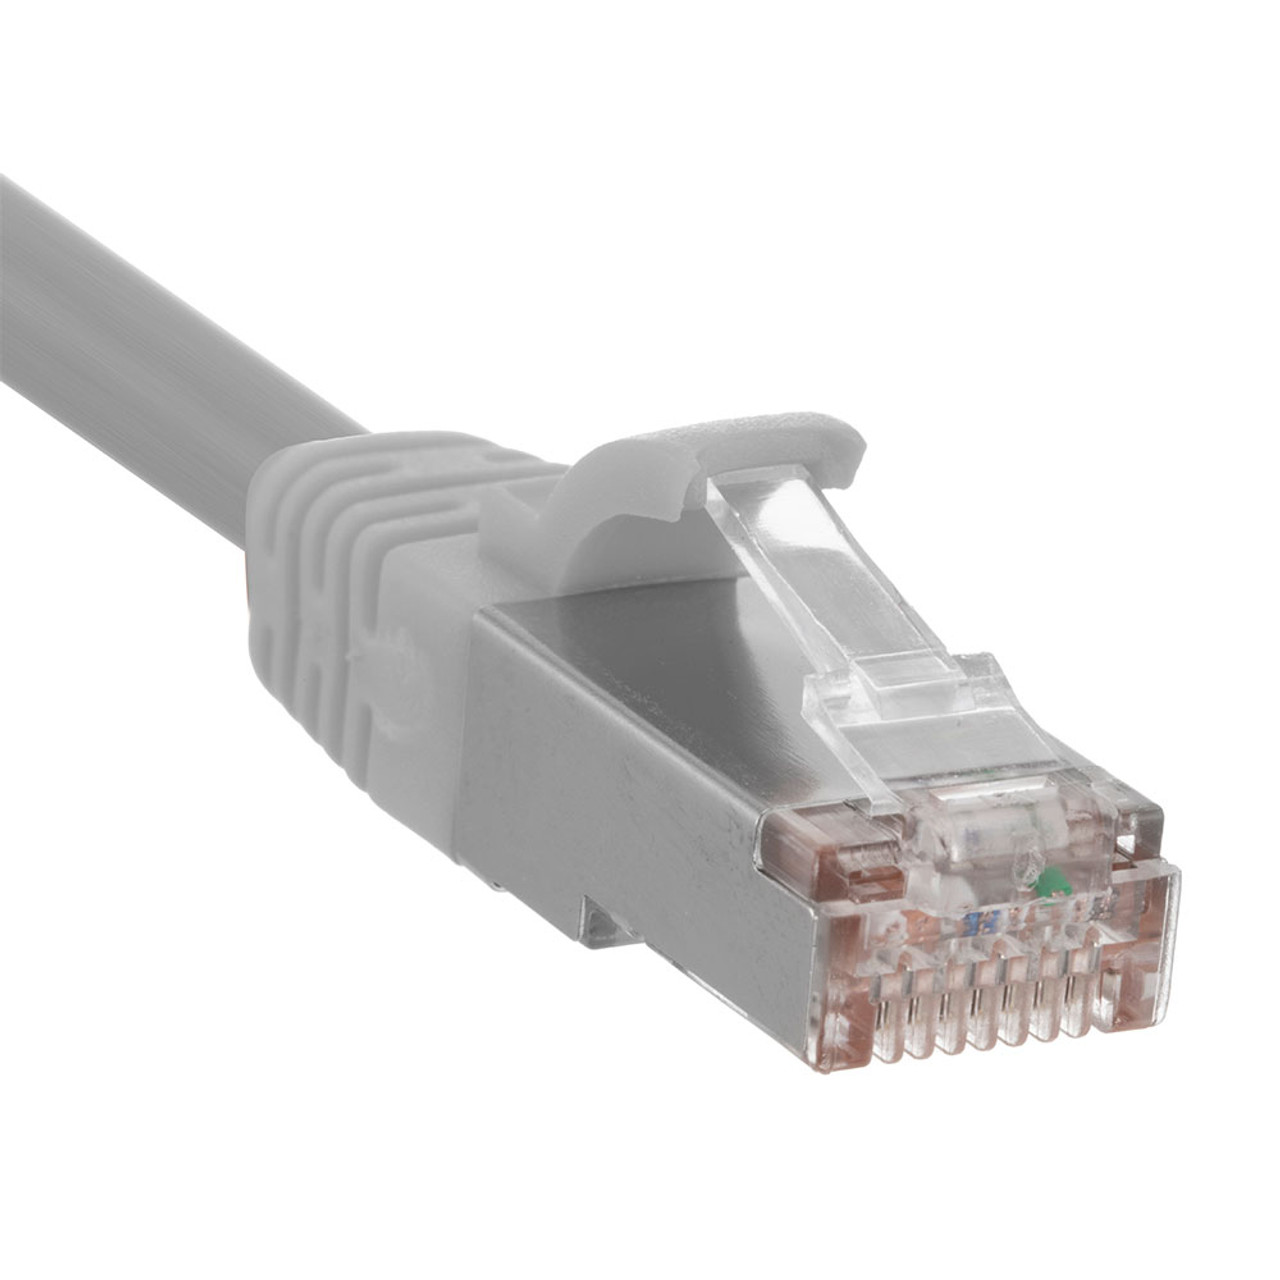 Ethernet Patch Cable CAT6, F/UTP, 26AWG,  5 Ft,  5 pack, Gray